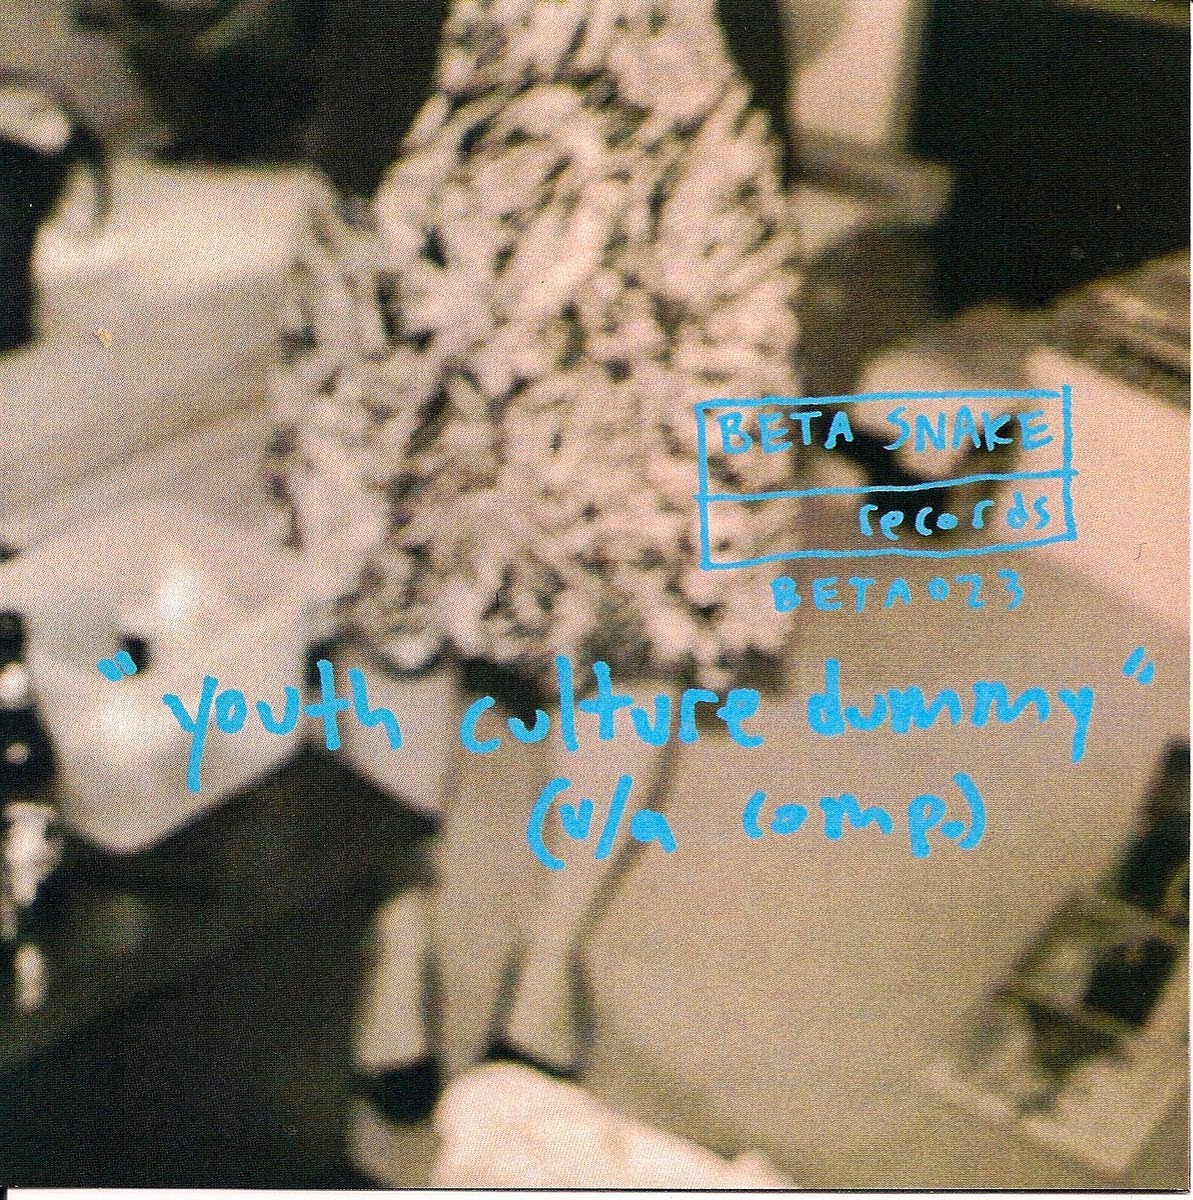 YOUTH CULTURE DUMMY - BETA SNAKE COMPILATION (16 SONGS) 2012